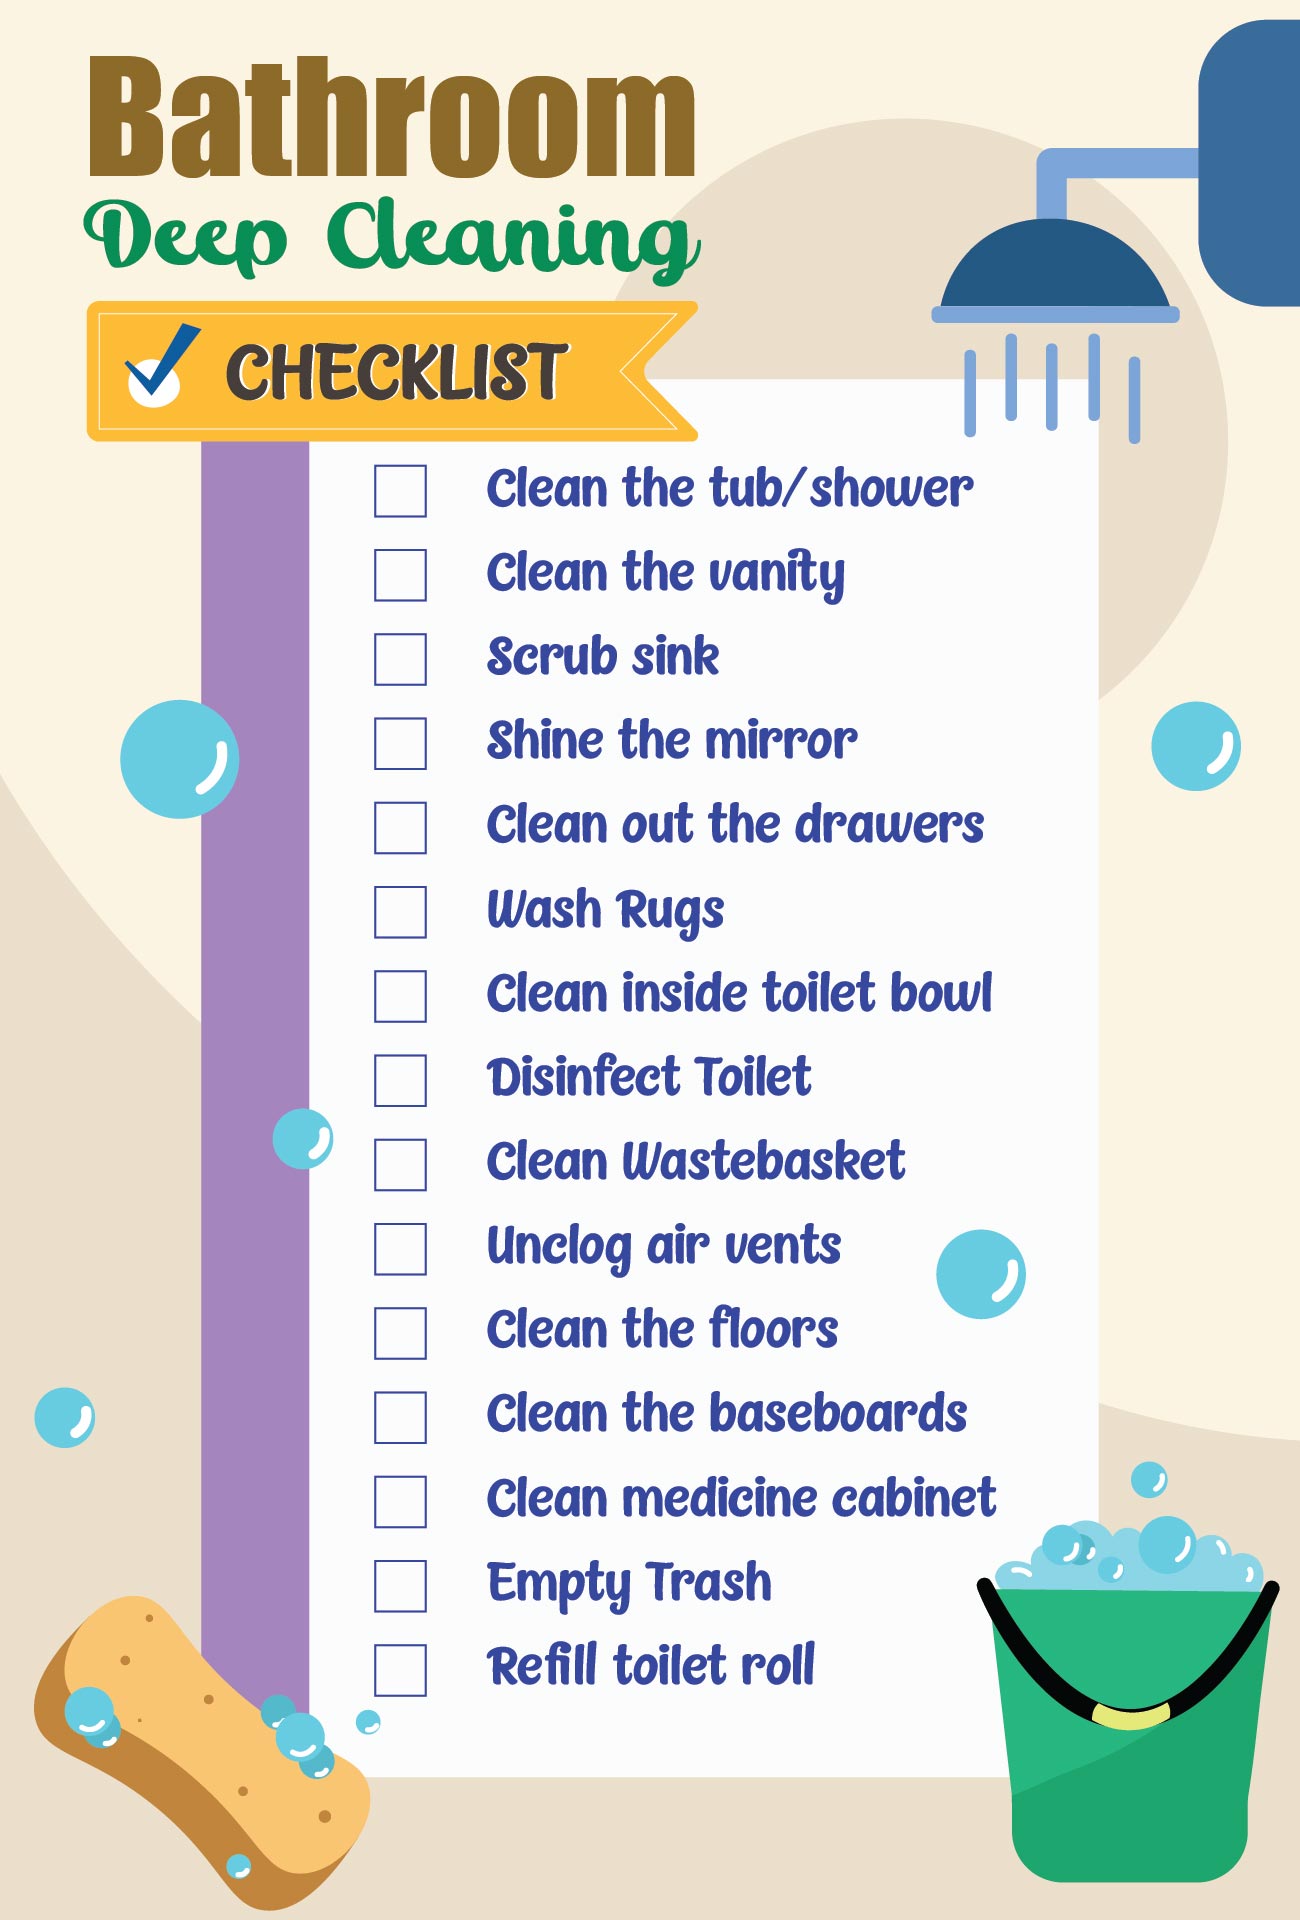 8-best-images-of-restroom-cleaning-schedule-printable-daily-bathroom